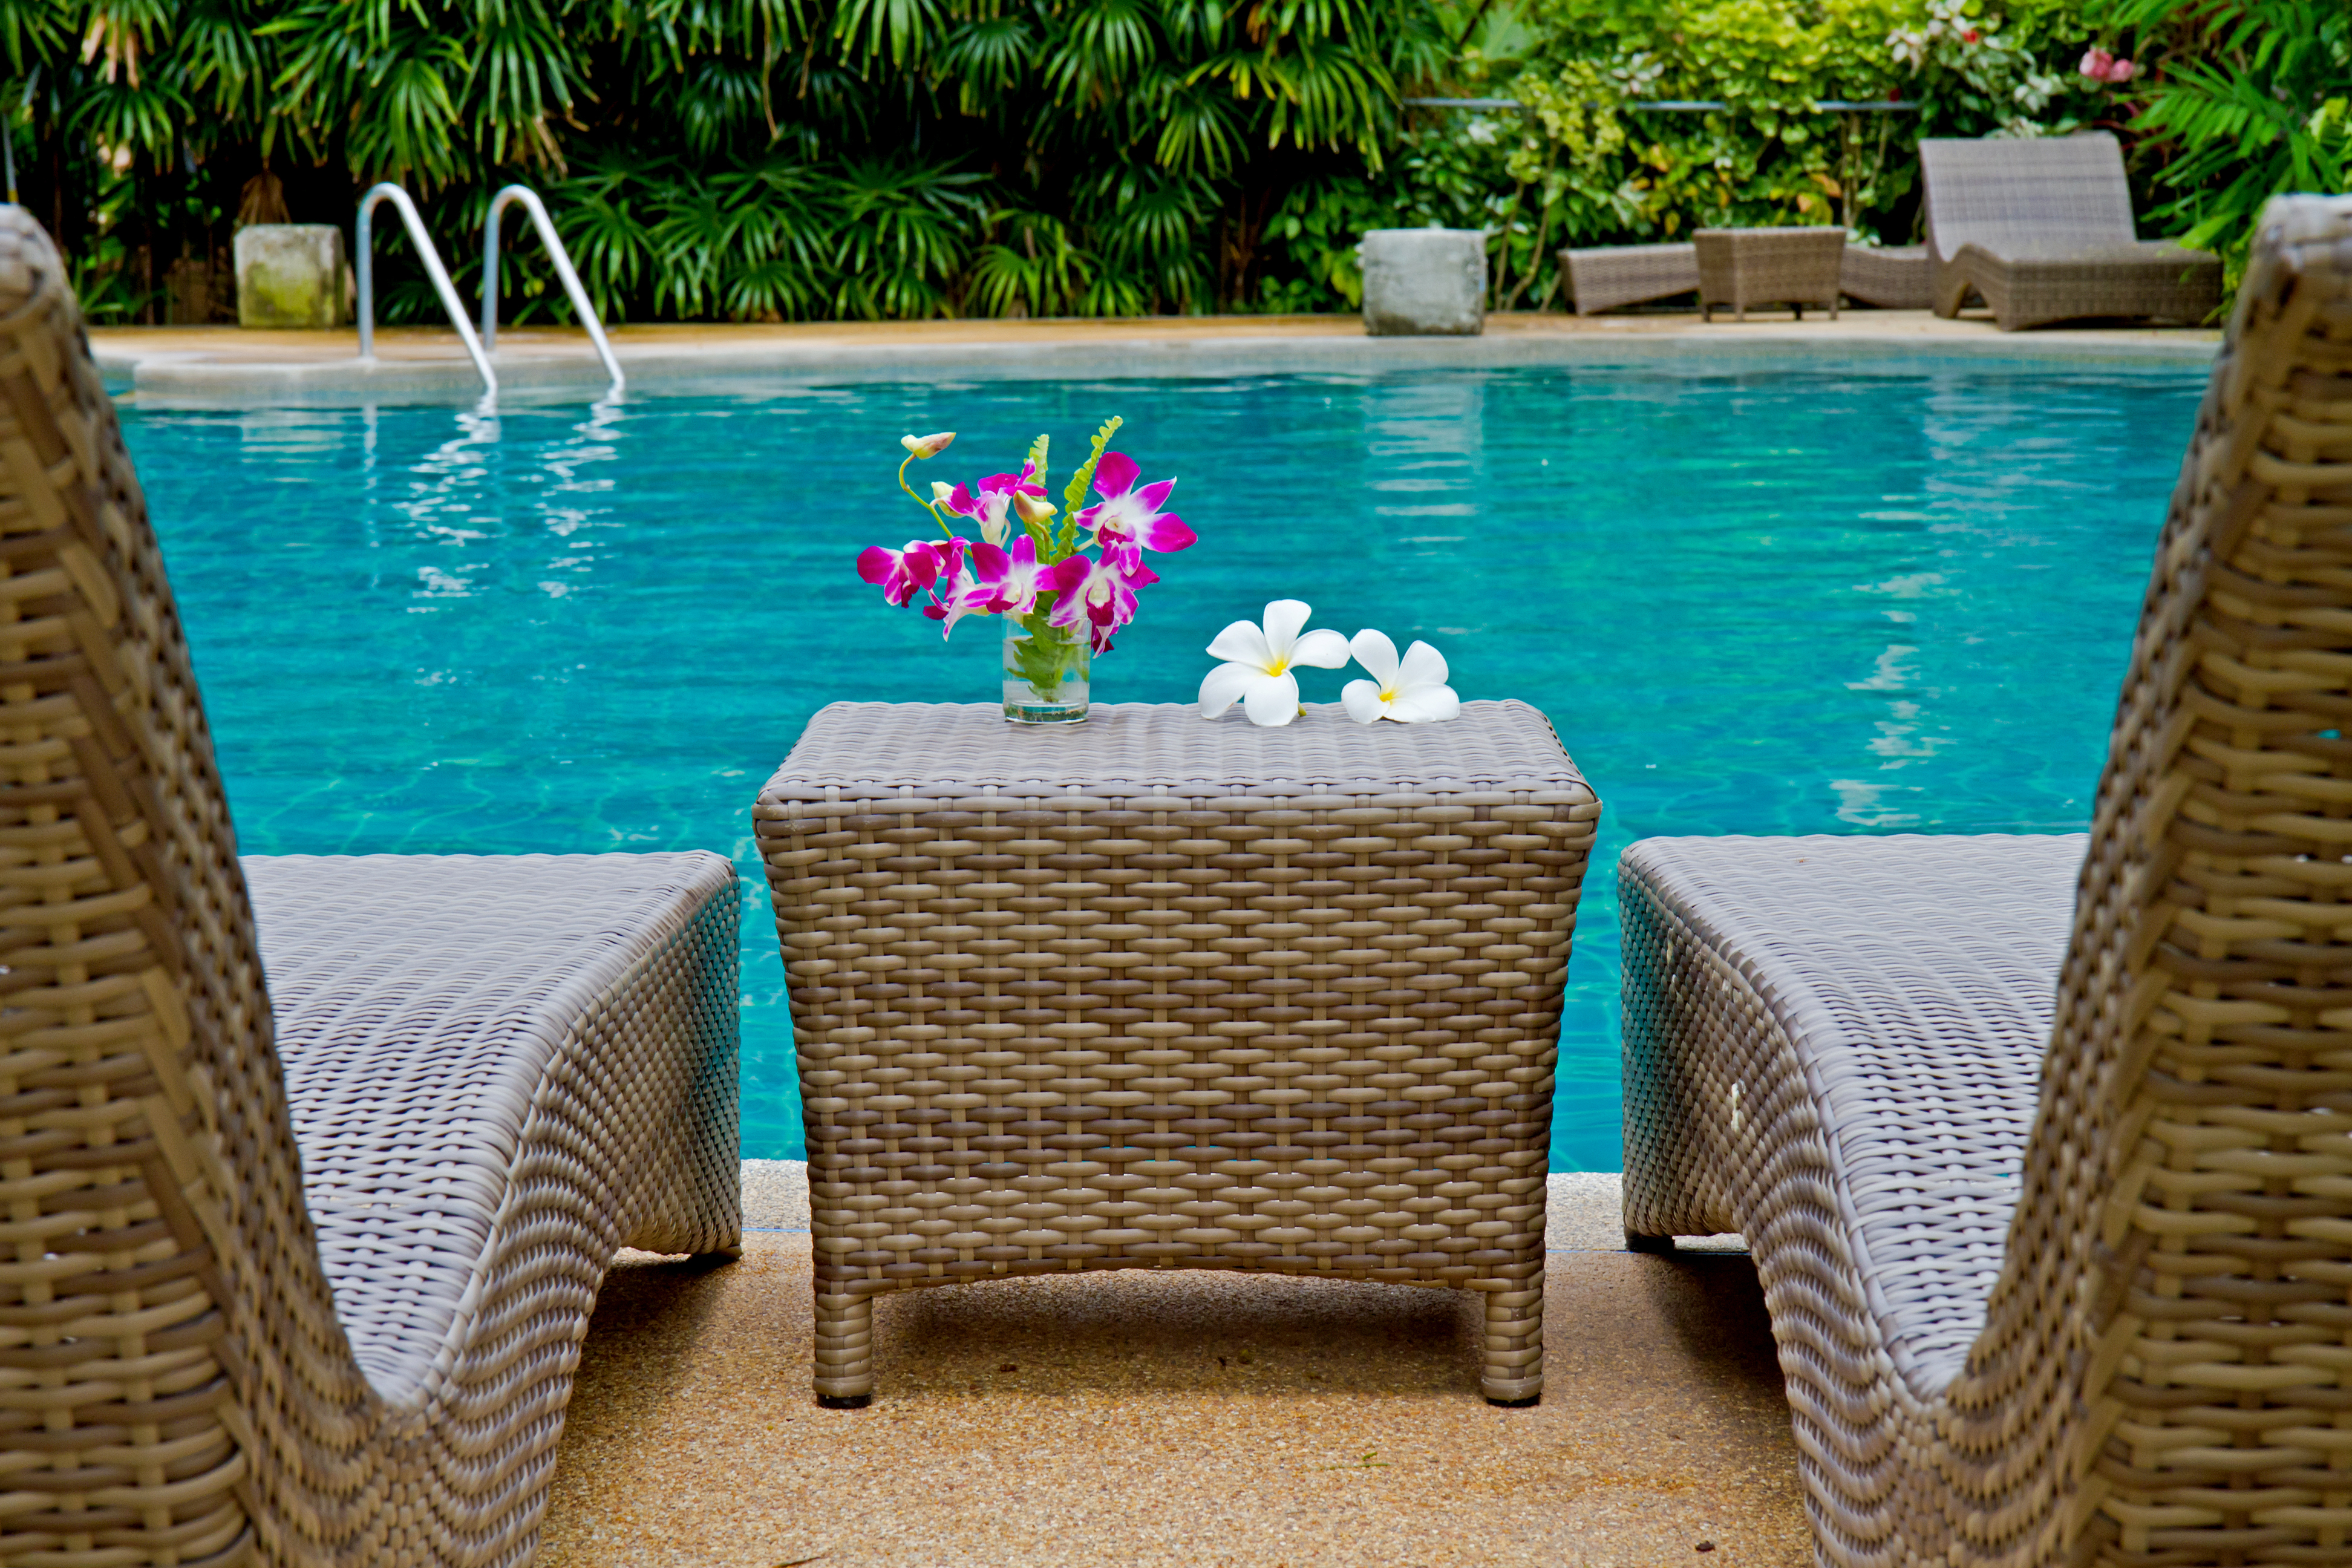 A shot of two lounge chairs by a pool with flowers between them